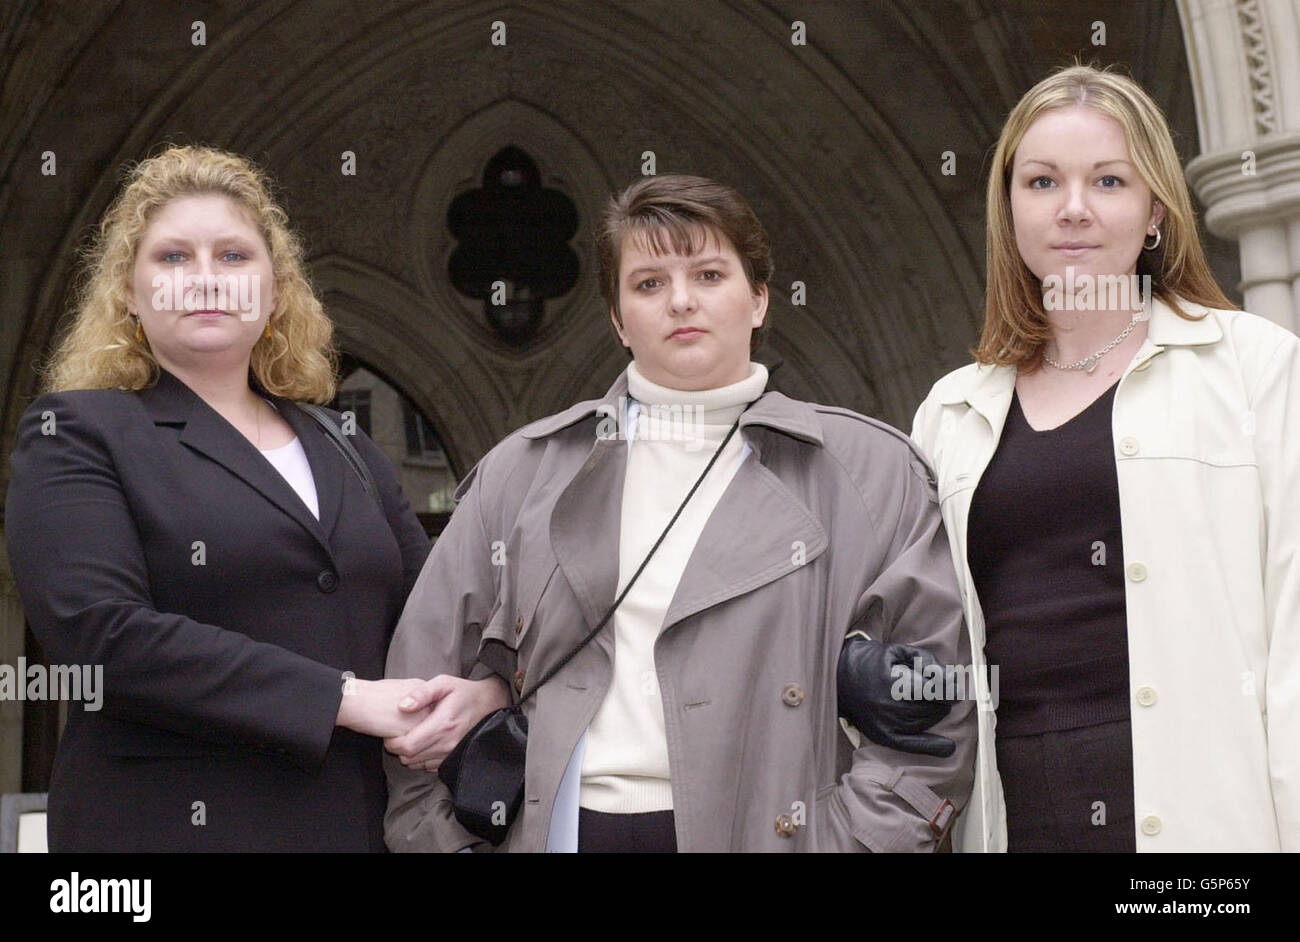 From left - Penny Cockings from Yeovil in Somerset, Trudi Banning from Leamington Spa and Michelle Markey from Reading, stand outside the High Court, as a case against Schering Healthcare involving around 100 women, * who claim that they were exposed to potentially lethal side-effects by using the third generation contraceptive pill begins. The case is the first major group action involving the application of the Consumer Protection Act to a pharmaceutical product where it is alleged that the product 'Femodene' which appeared in 1987, carried an increased risk of danger to the user of which Stock Photo